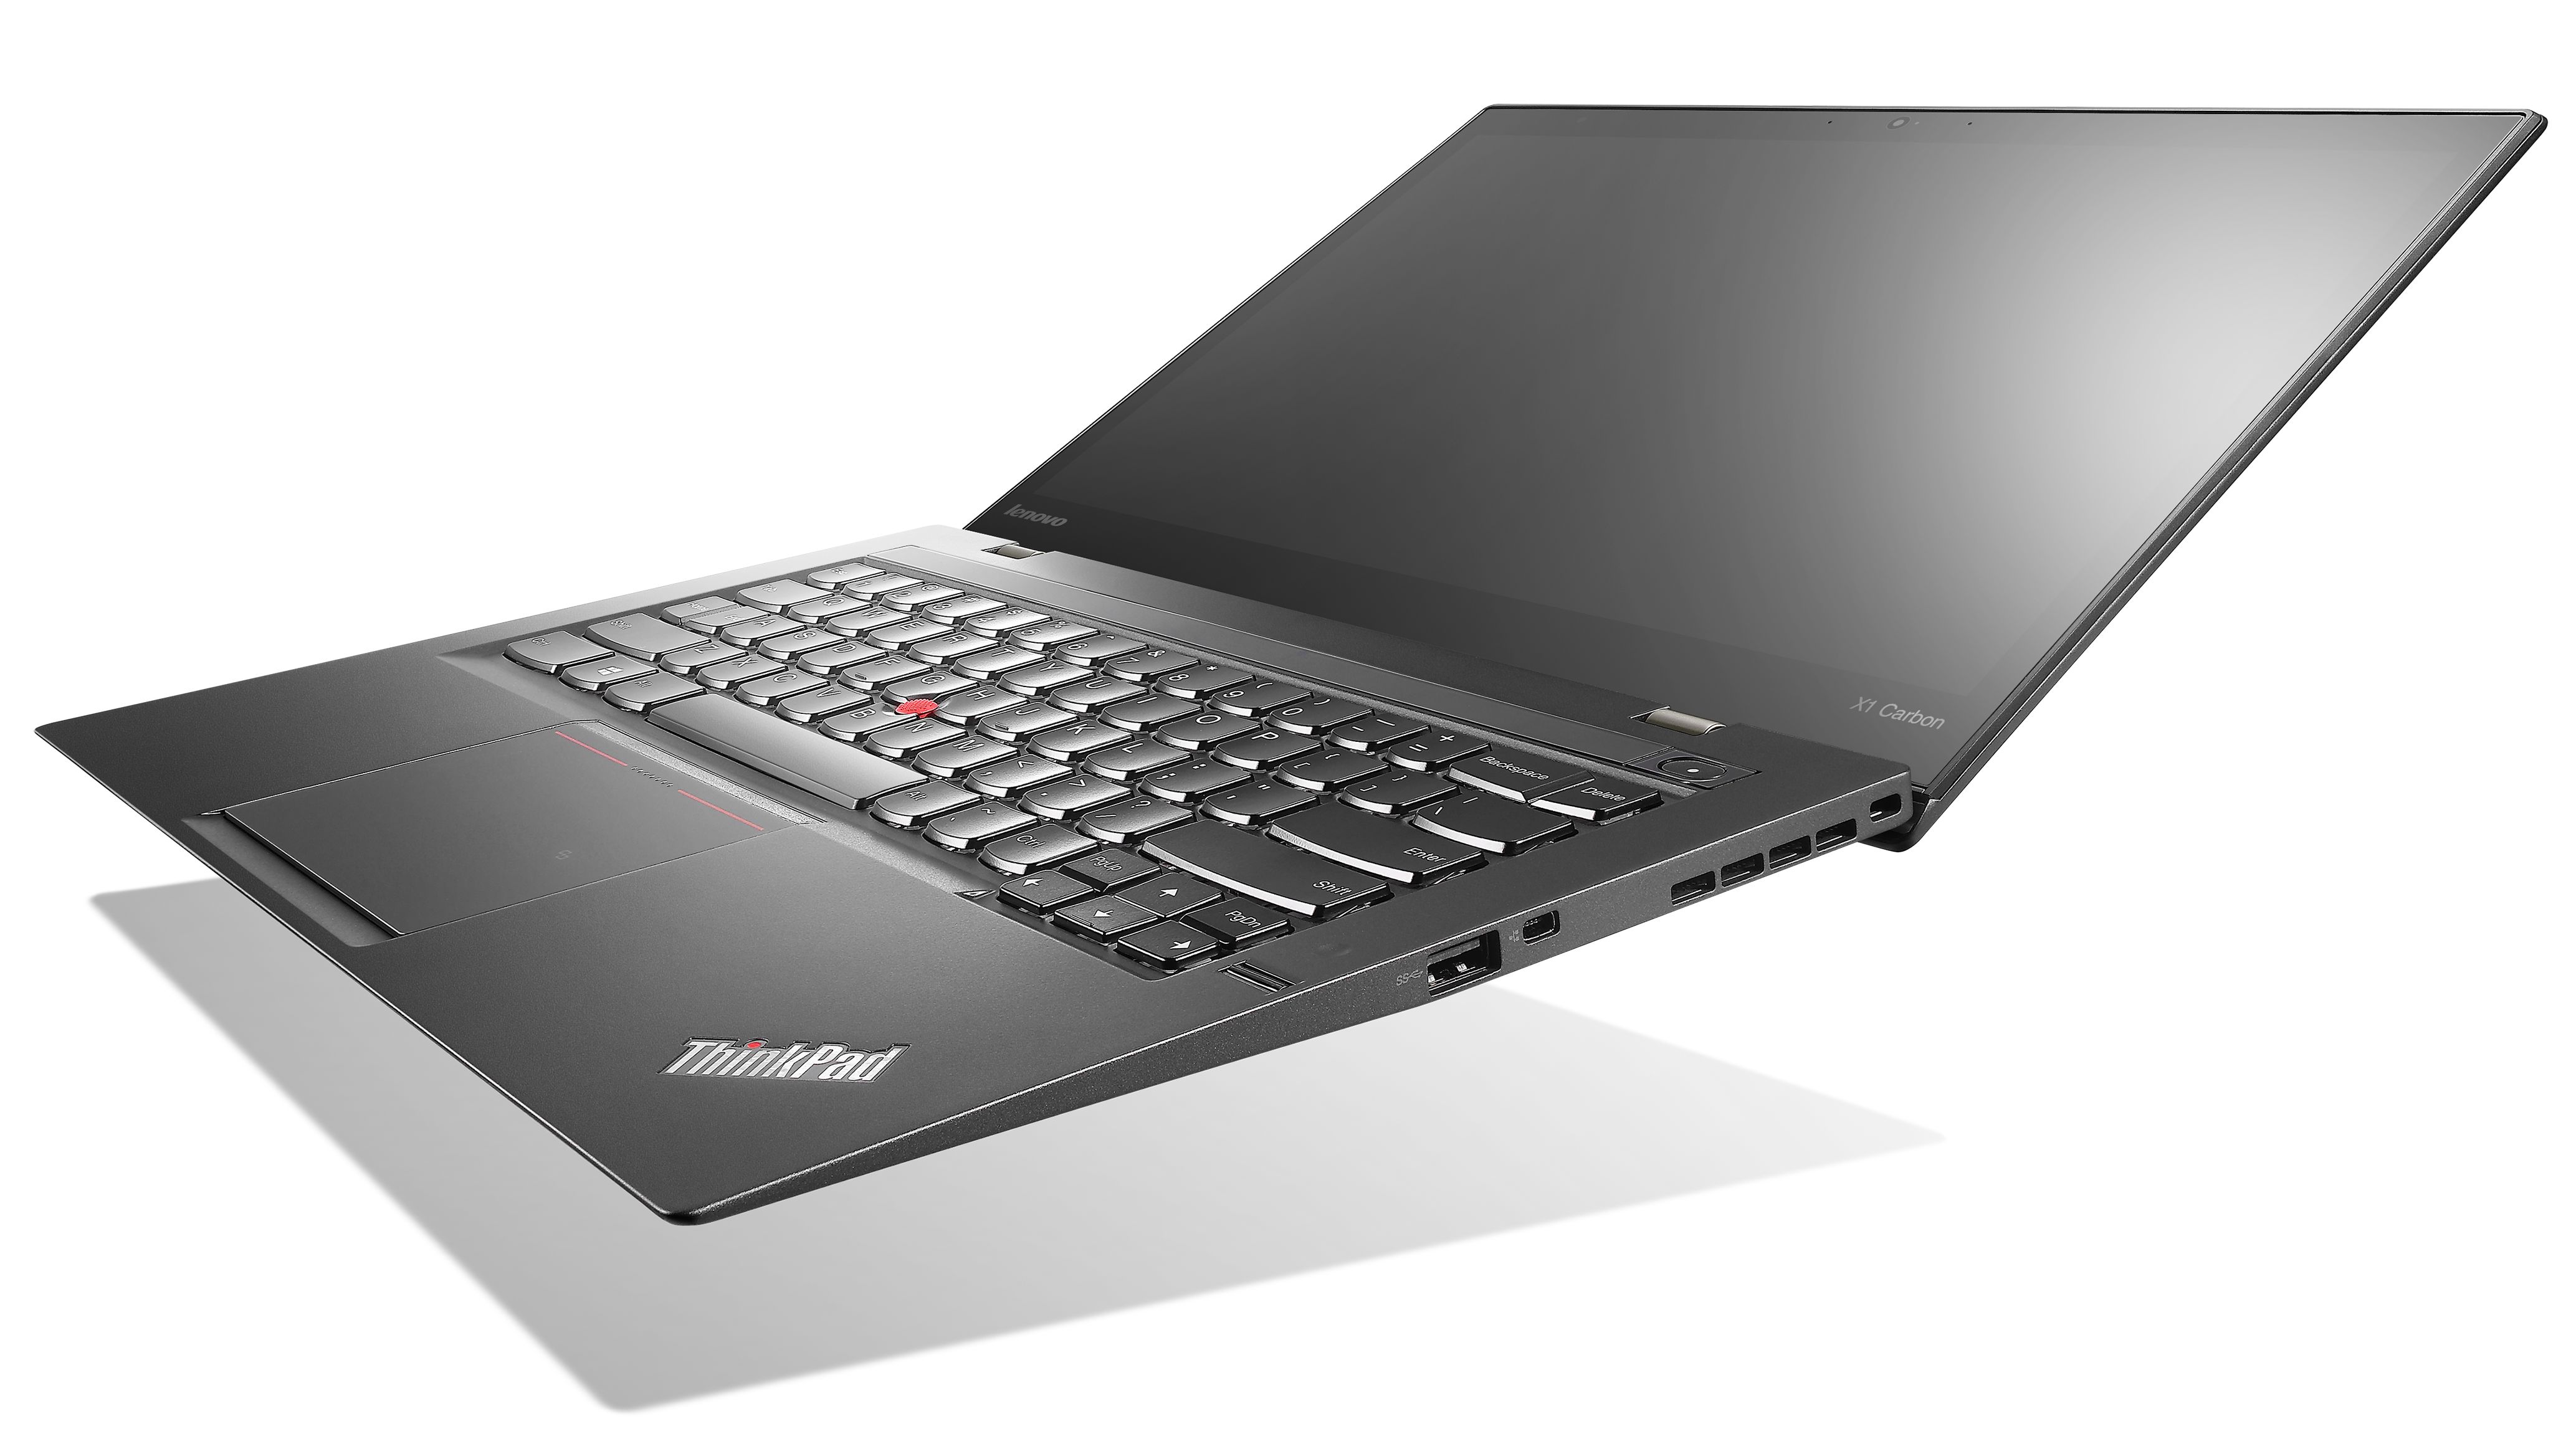 New ThinkPad X1 Carbon – First Look